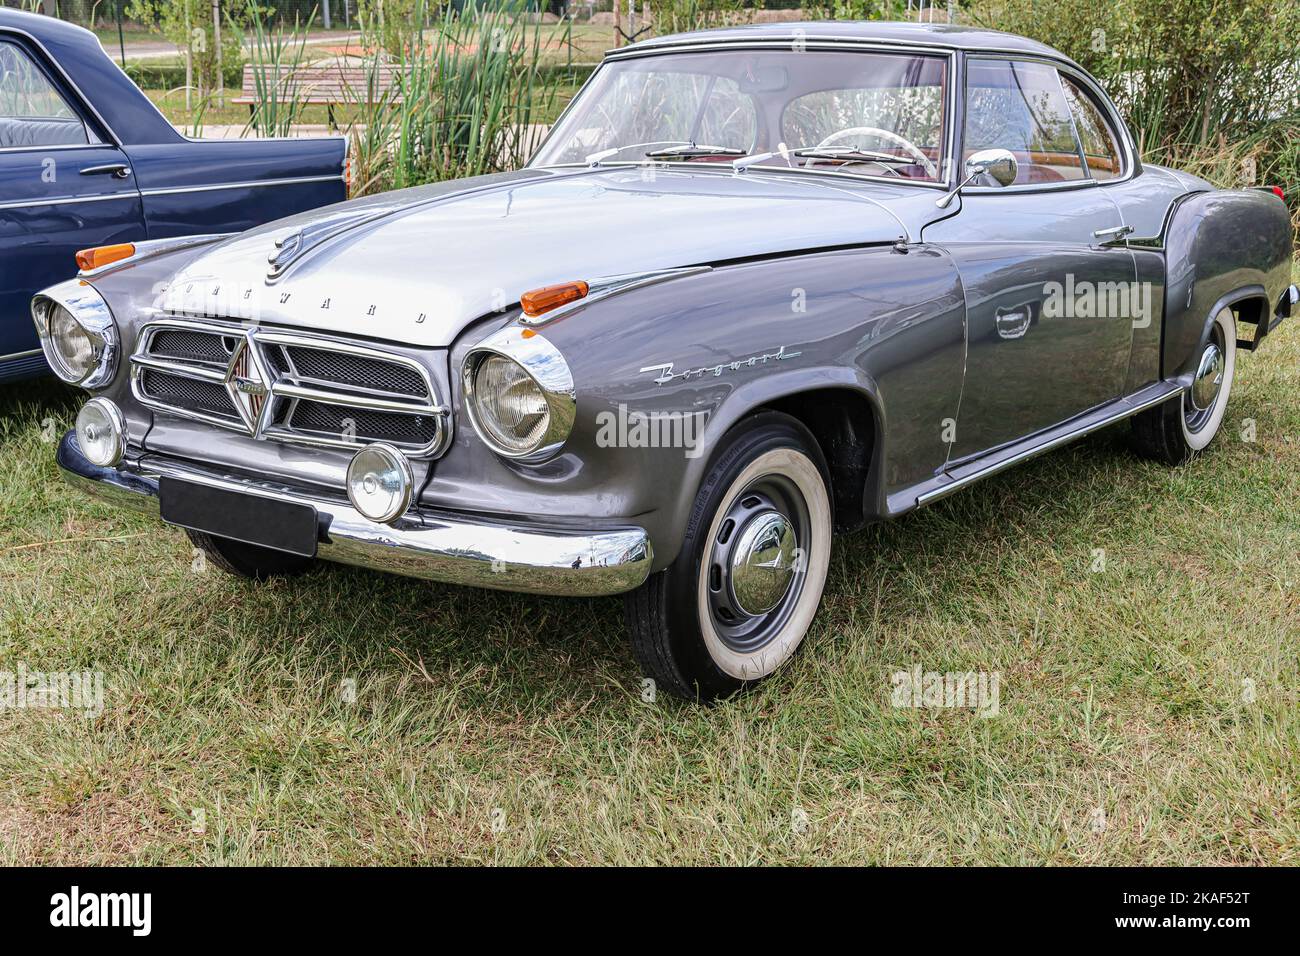 A gray historic Borgward Isabella Coupe car parked on a grassy meadow Stock Photo